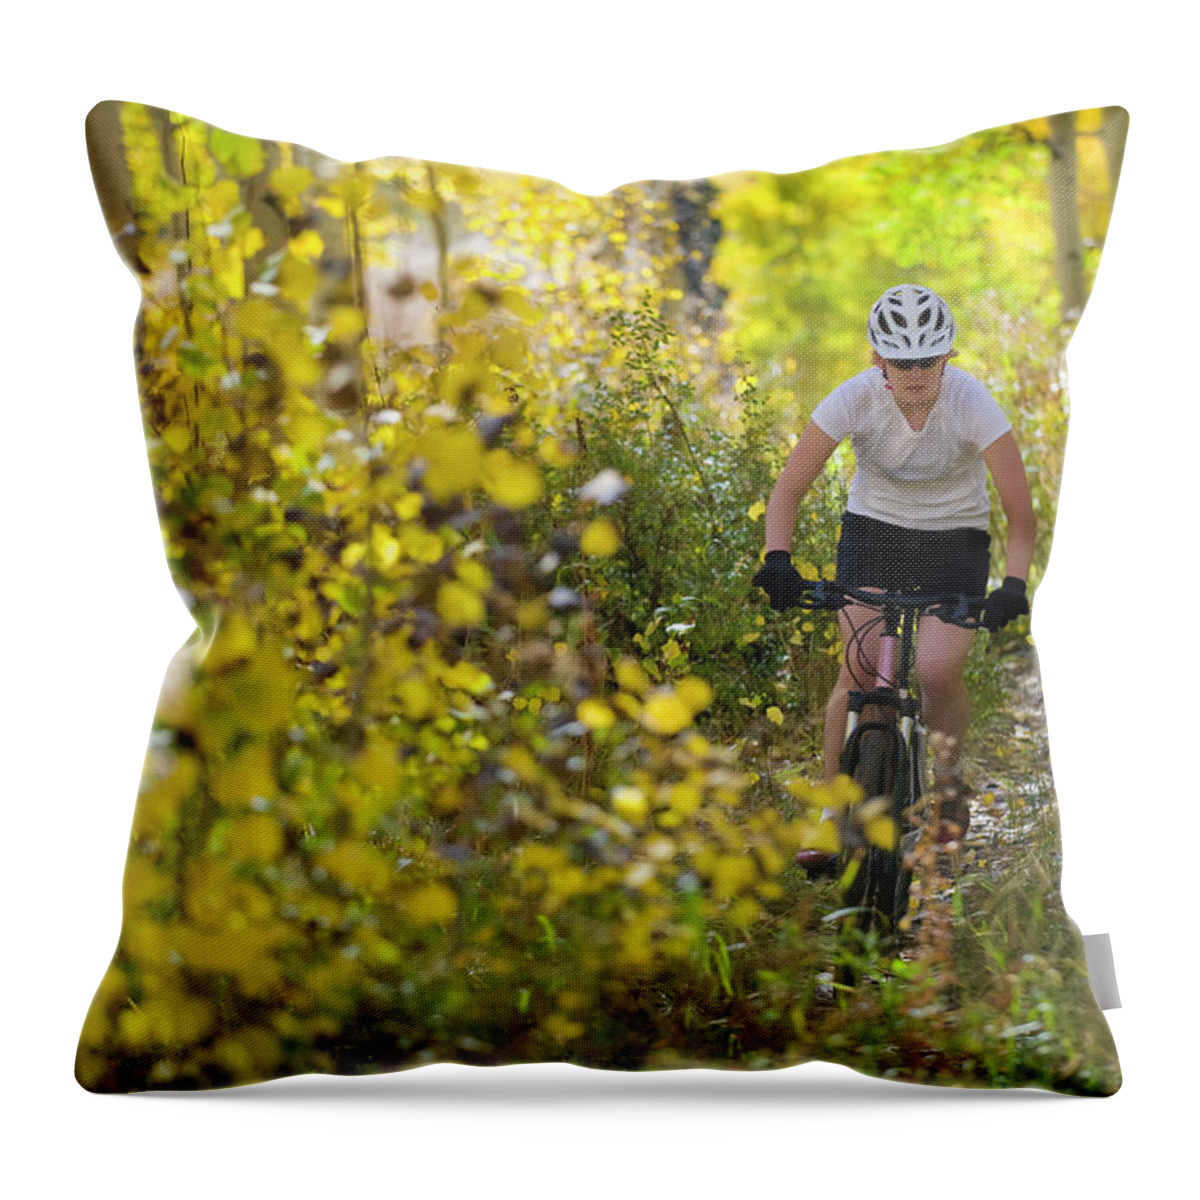 30-34 Years Throw Pillow featuring the photograph Female Mountain Biker Riding by Scott Markewitz